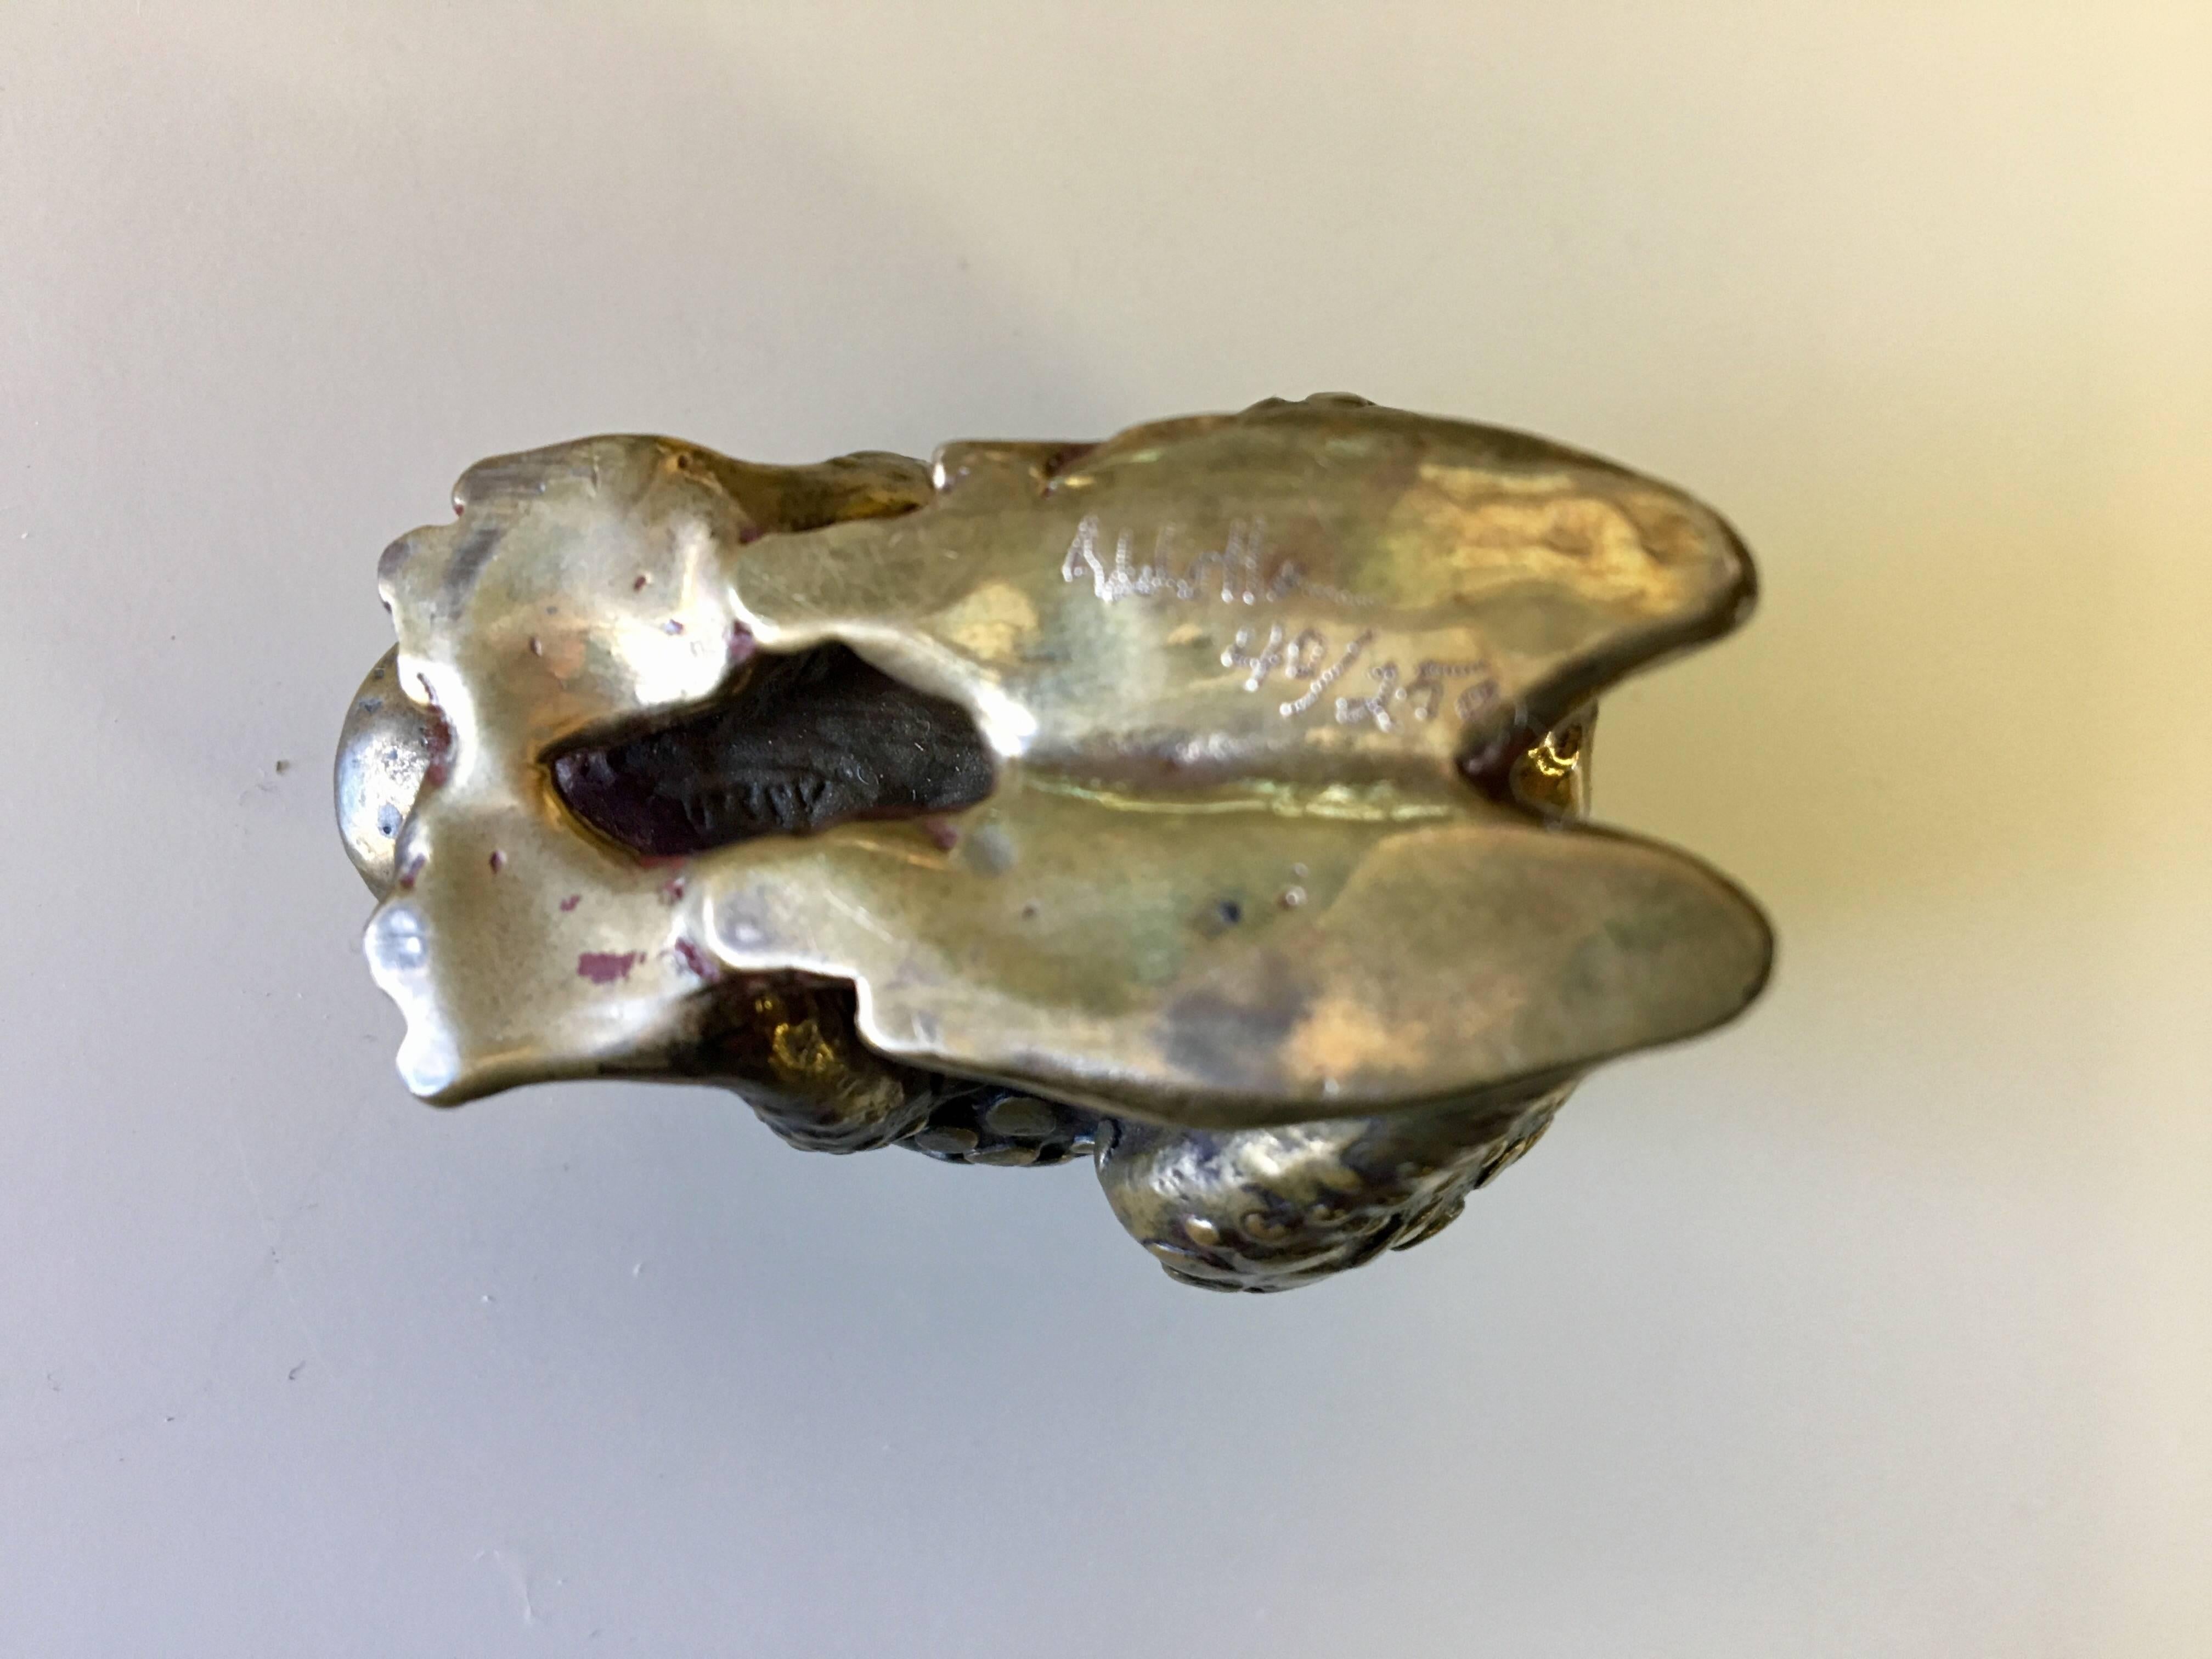 Hollywood Regency Rare Miniature Sculpture by Joseph Addotta Gold¬-Plated Bronze Frog Signed